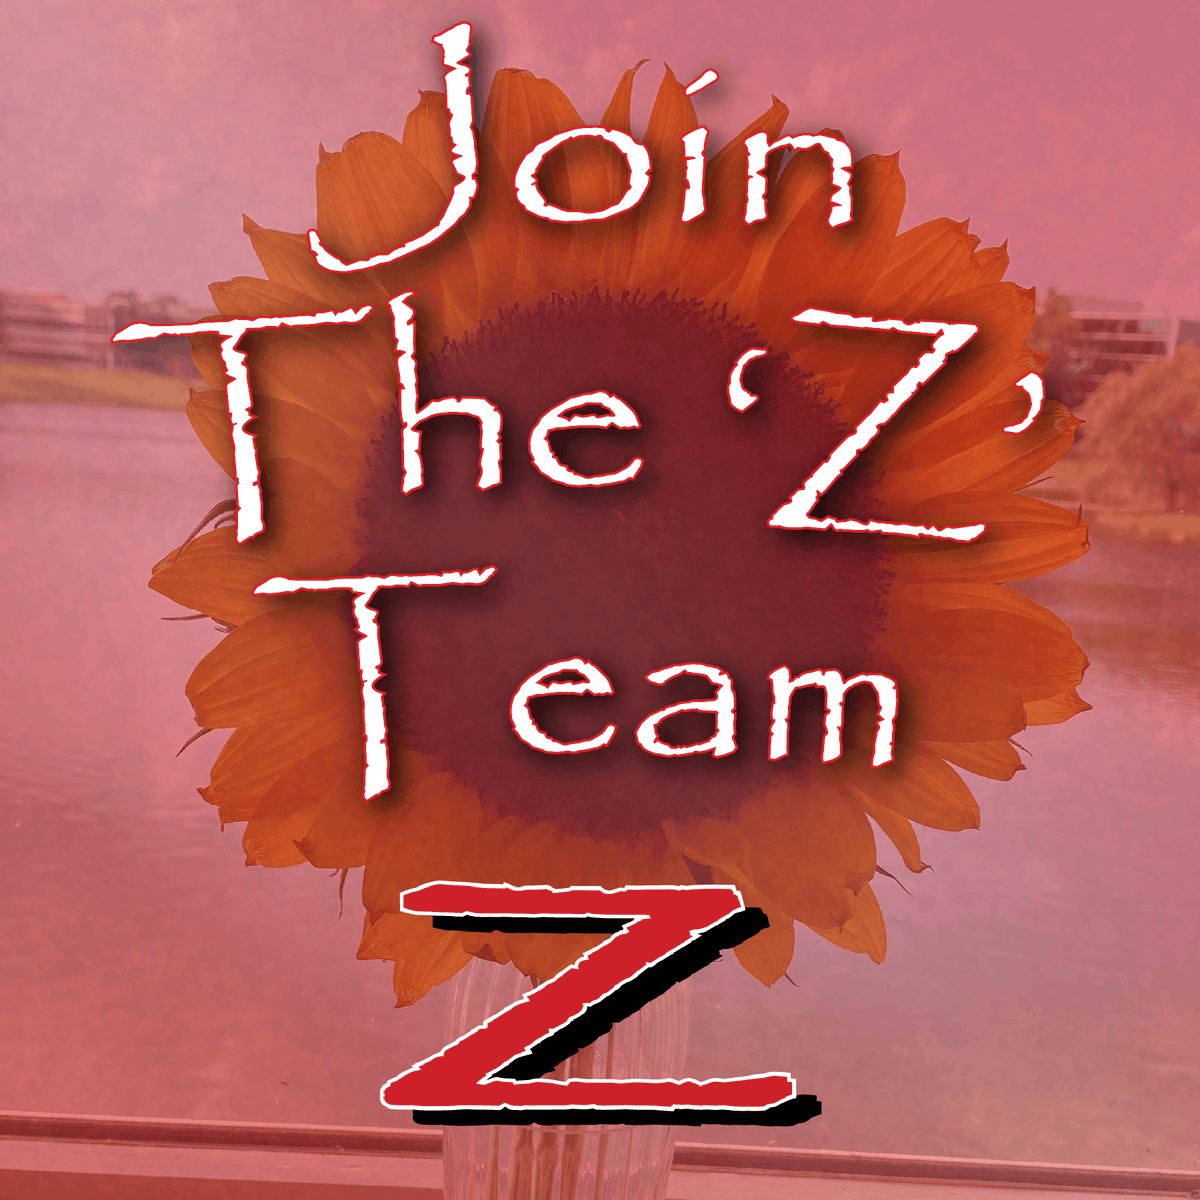 ⭐⭐⭐⭐⭐⭐⭐⭐
JOIN THE Z-MANAGEMENT TEAM!
⭐⭐⭐⭐⭐⭐⭐⭐

We have an immediate opening on our Management Team!

Please call the restaurant to speak with our managers for more info 
☎️ (609) 860-9600

#ZinnasBistro #NowHIriing